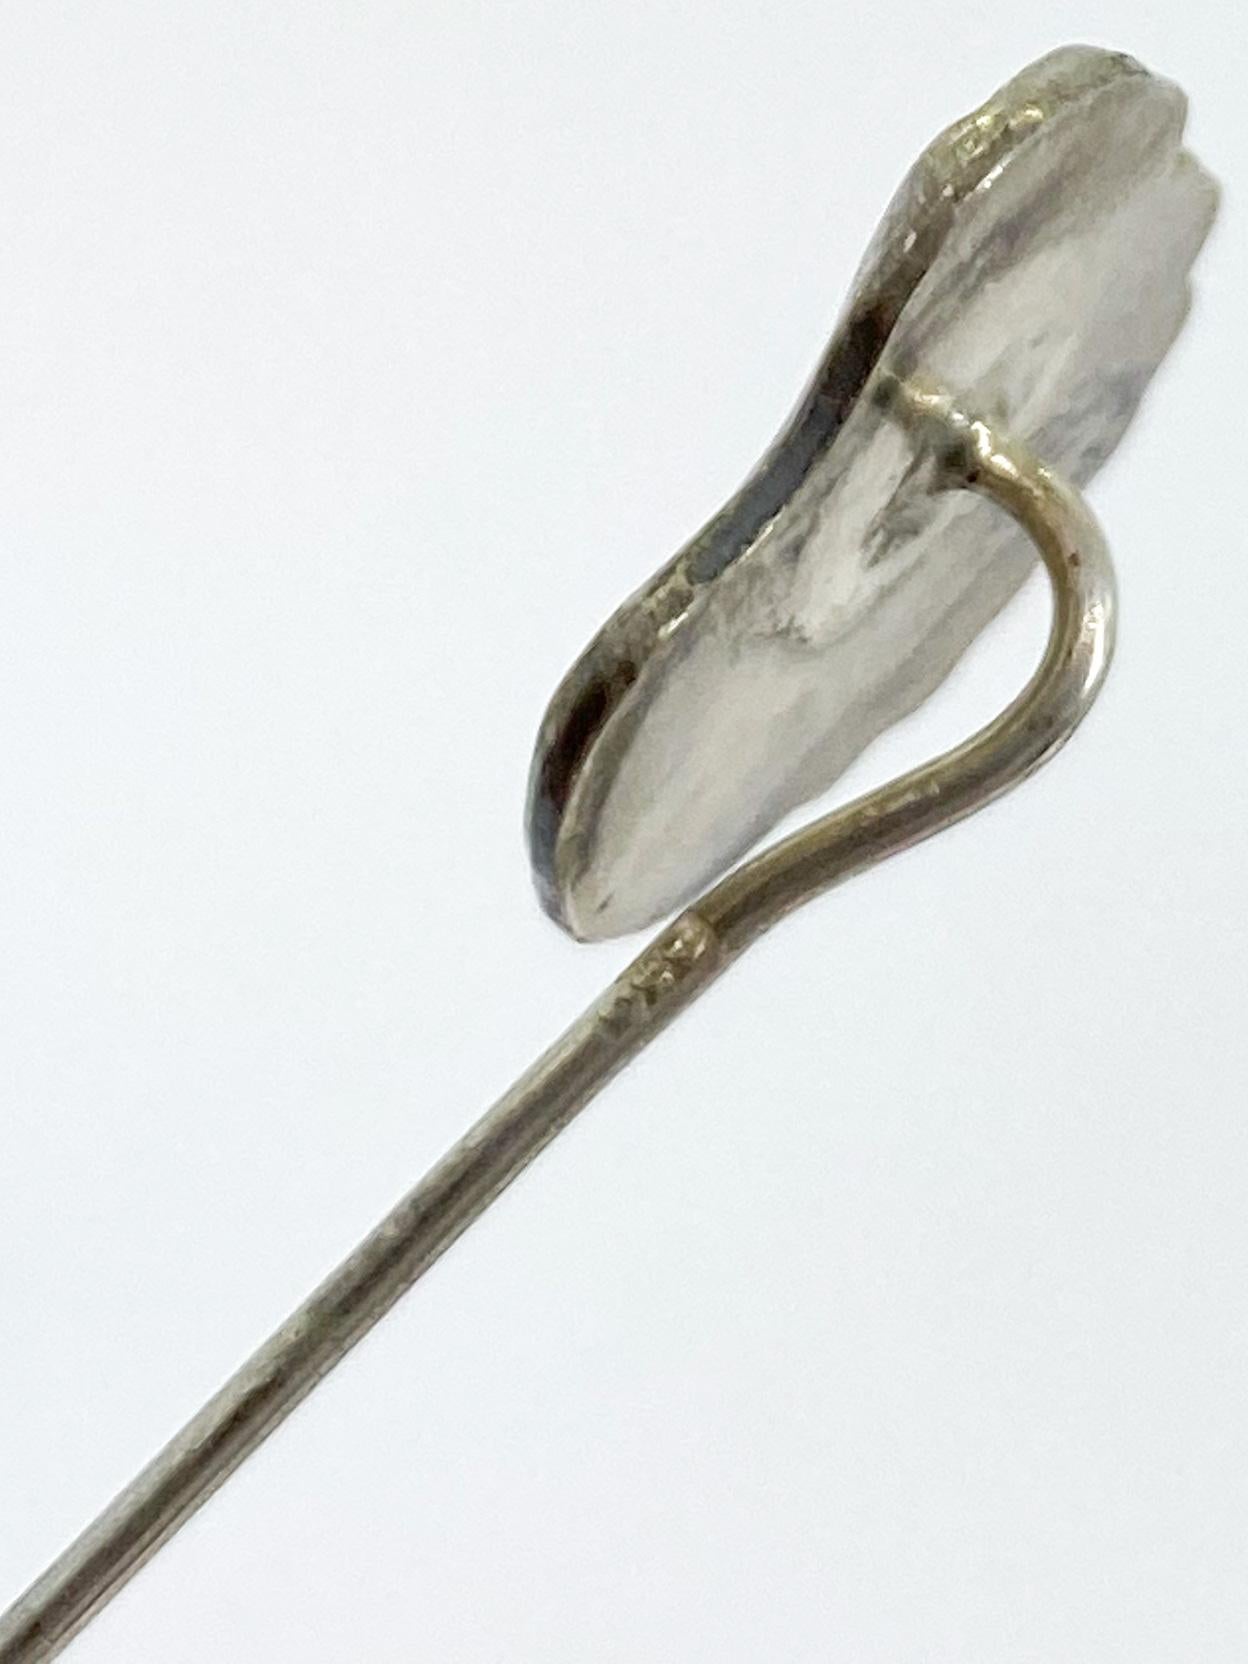 Stickpin Silver Art Deco Jugend.
Stik Pin
Fine needle, I do not know where made.
I doubt manufacturing for the early 20th century.